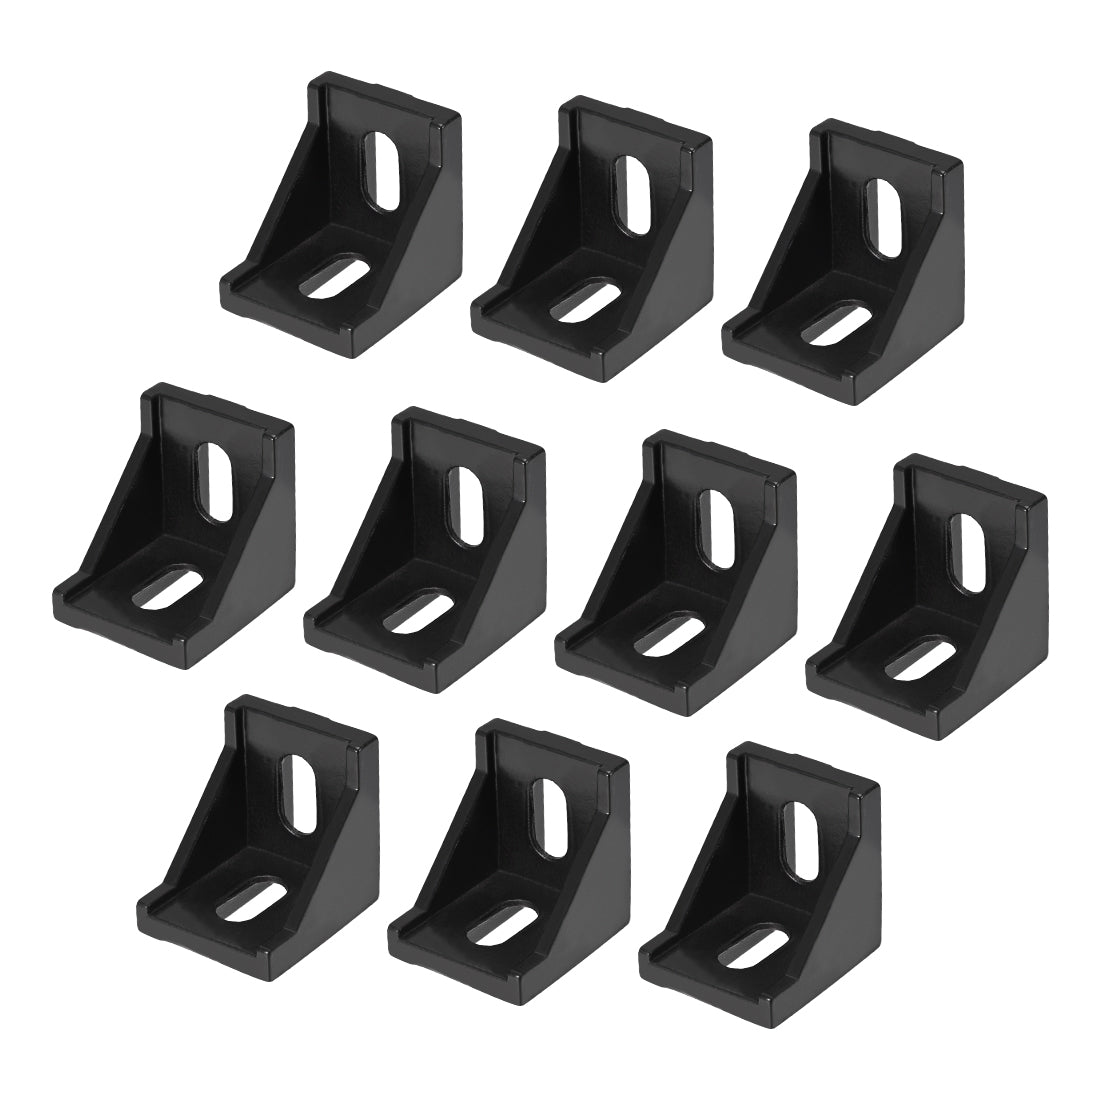 uxcell Uxcell Inside Corner Bracket Gusset, 40mm x 40mm for 4040 Series Aluminum Extrusion Profile with Slot 8mm, 10 Pcs (Black)